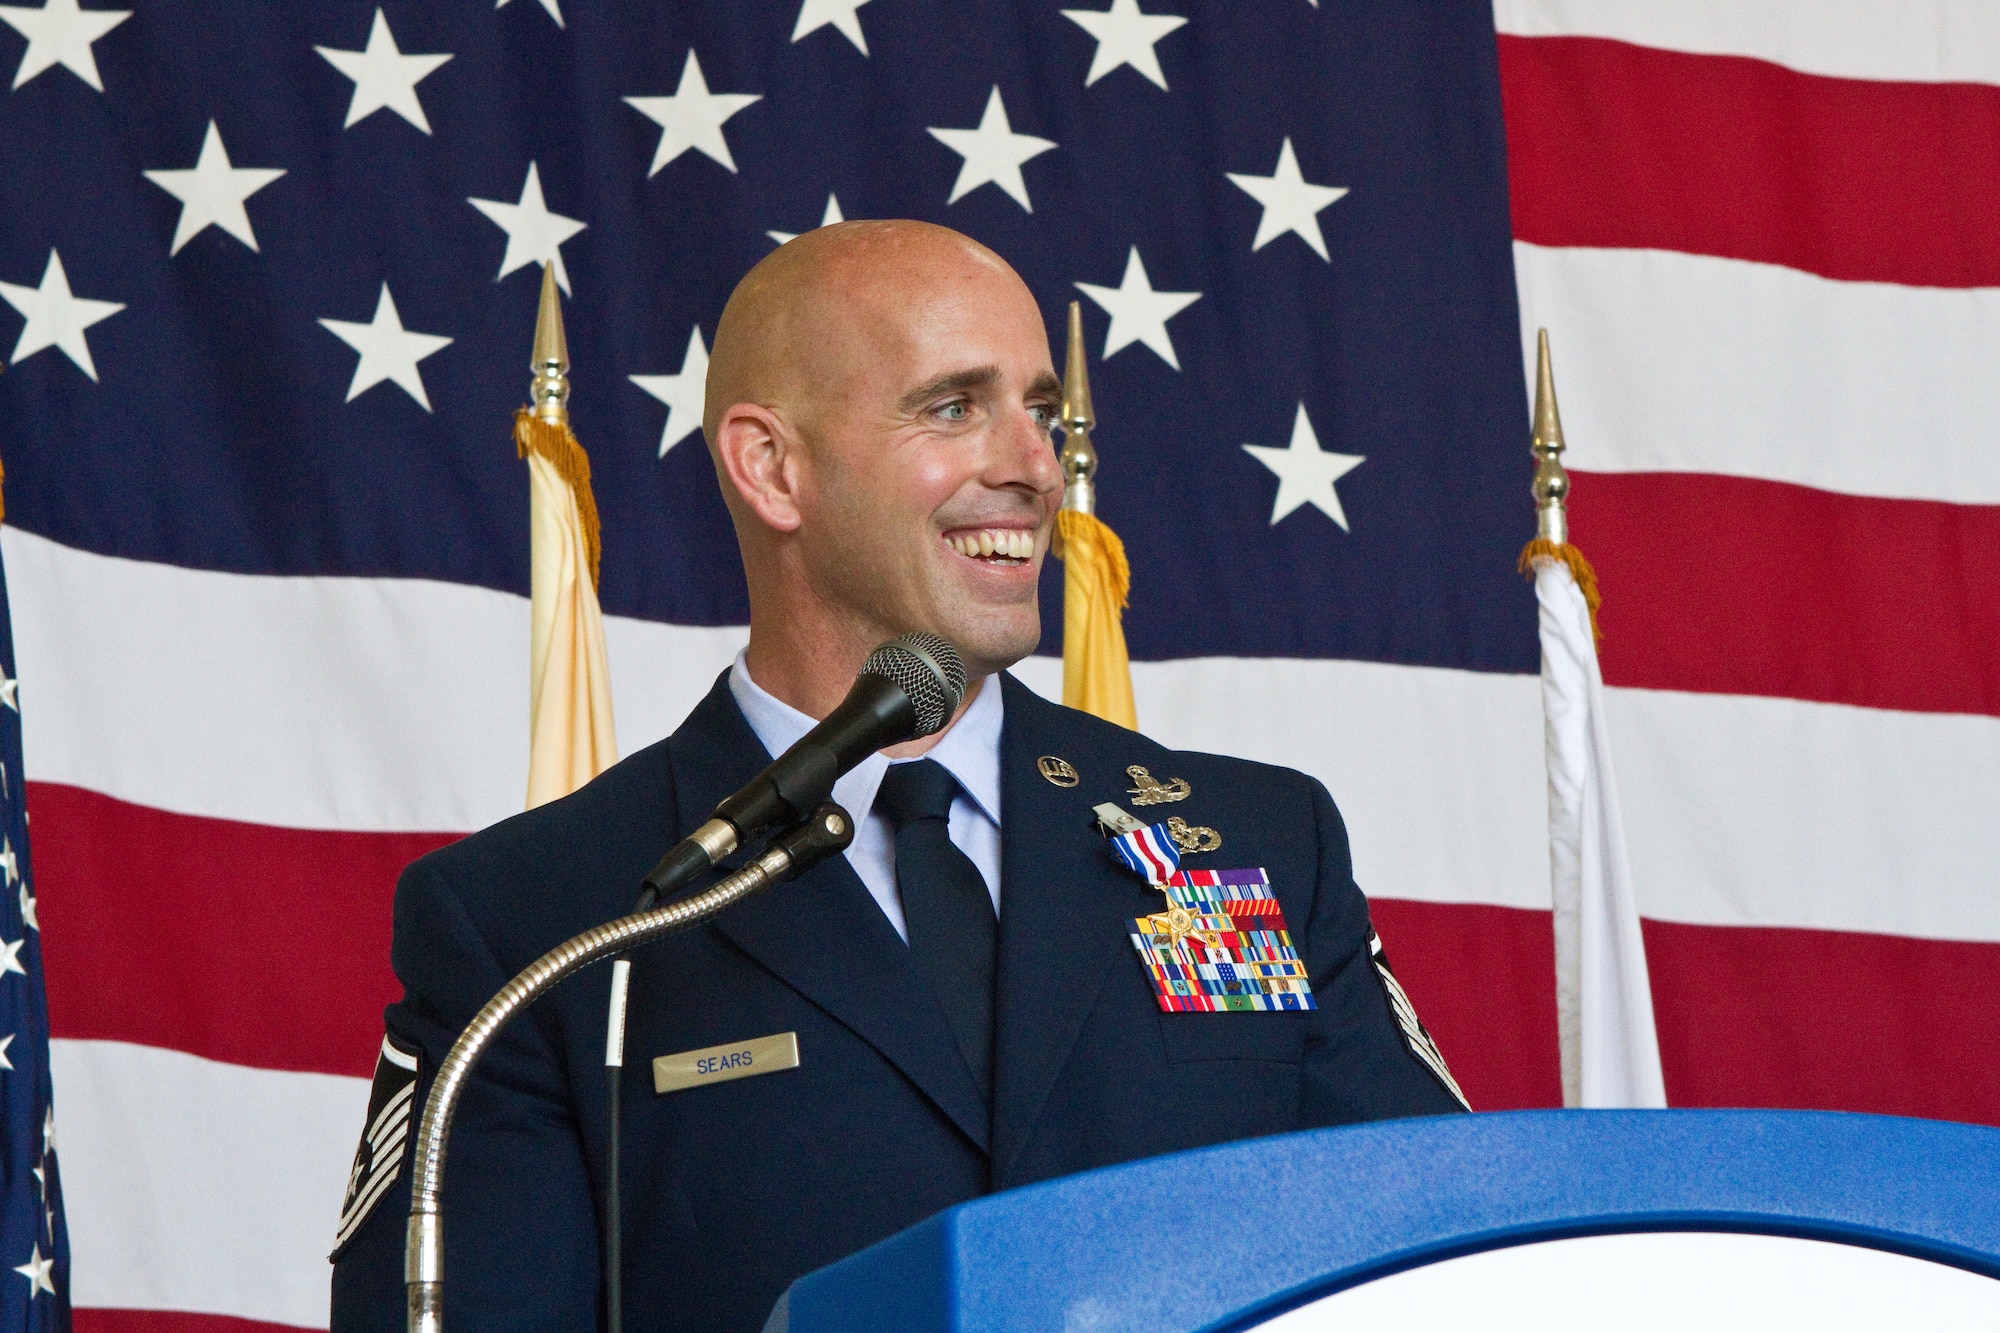 A picture of Silver Star recipient Master Sgt. Michael F. Sears, 177th Fighter Wing, addressing the National Guard Bureau and New Jersey National Guard leadership, family, friends and fellow 177th Airmen.